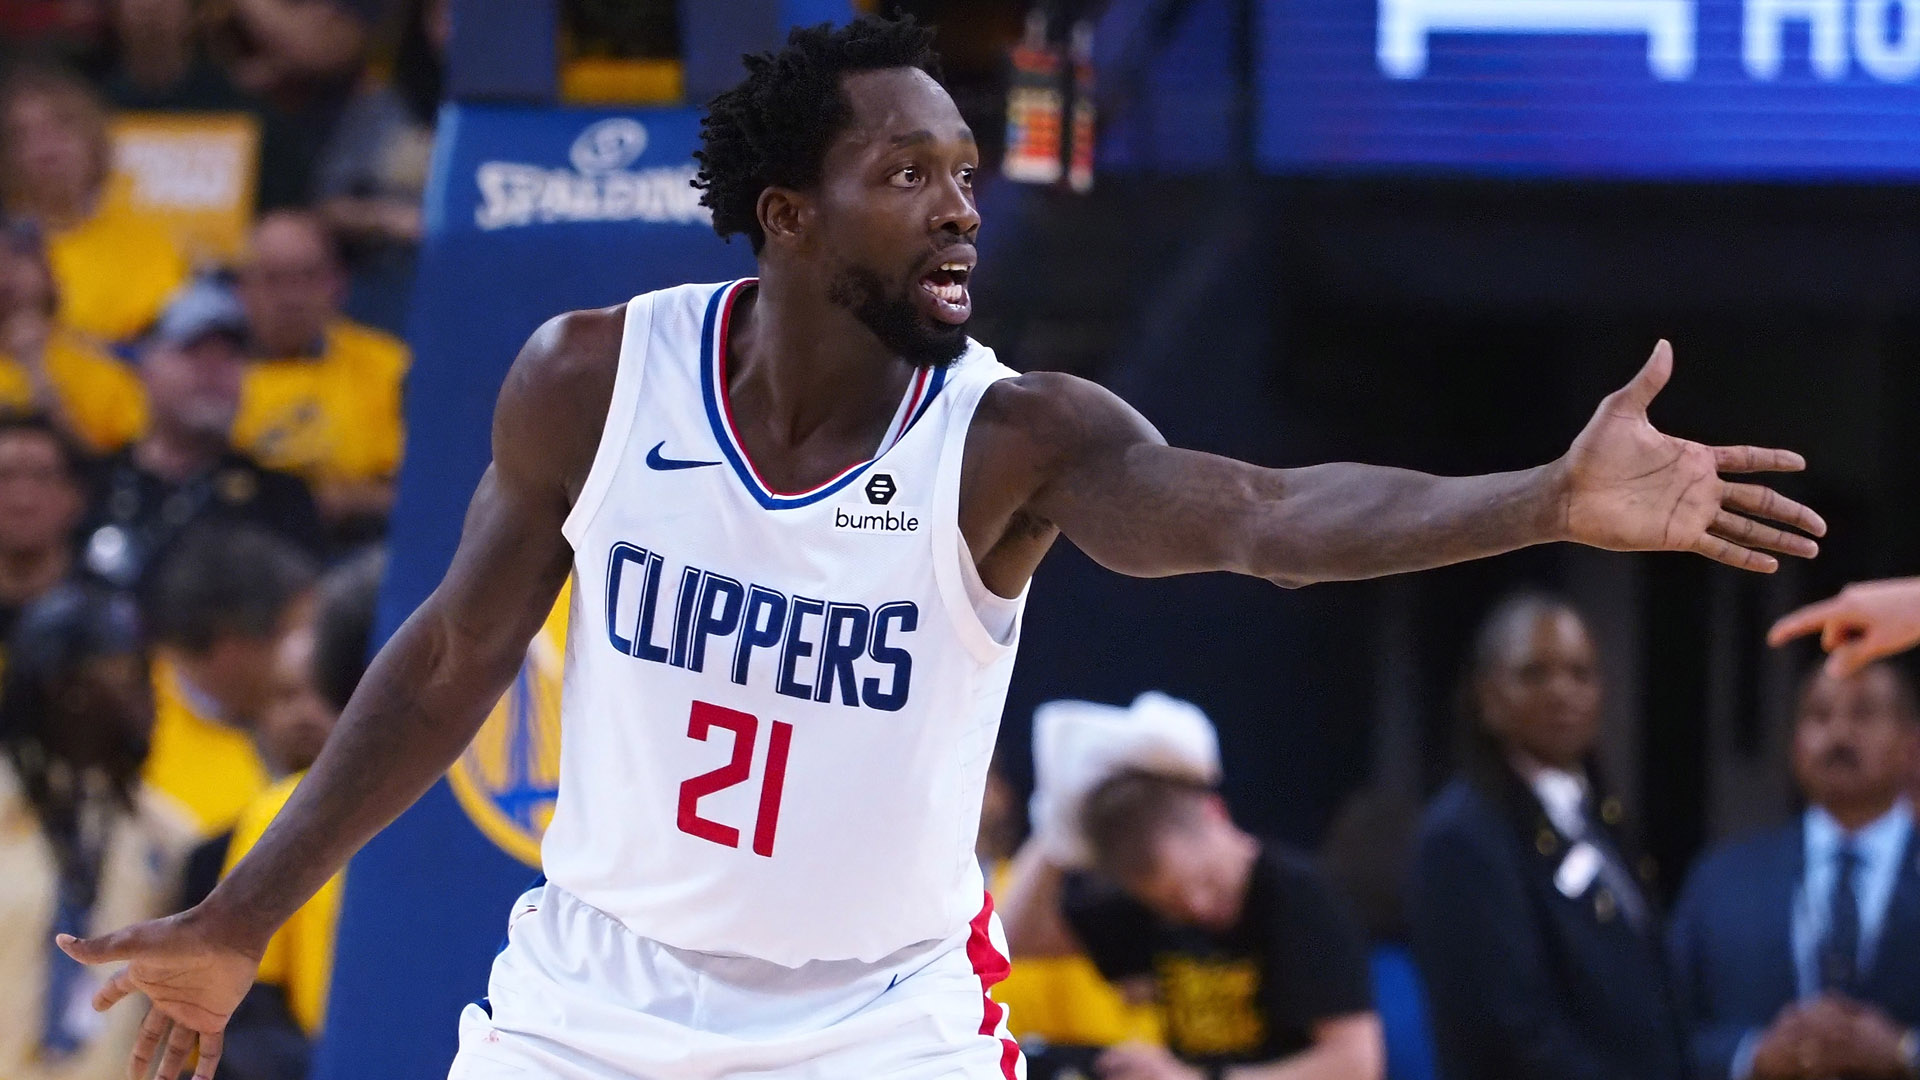 Will Patrick Beverley stay with the Utah Jazz? Here's what he said